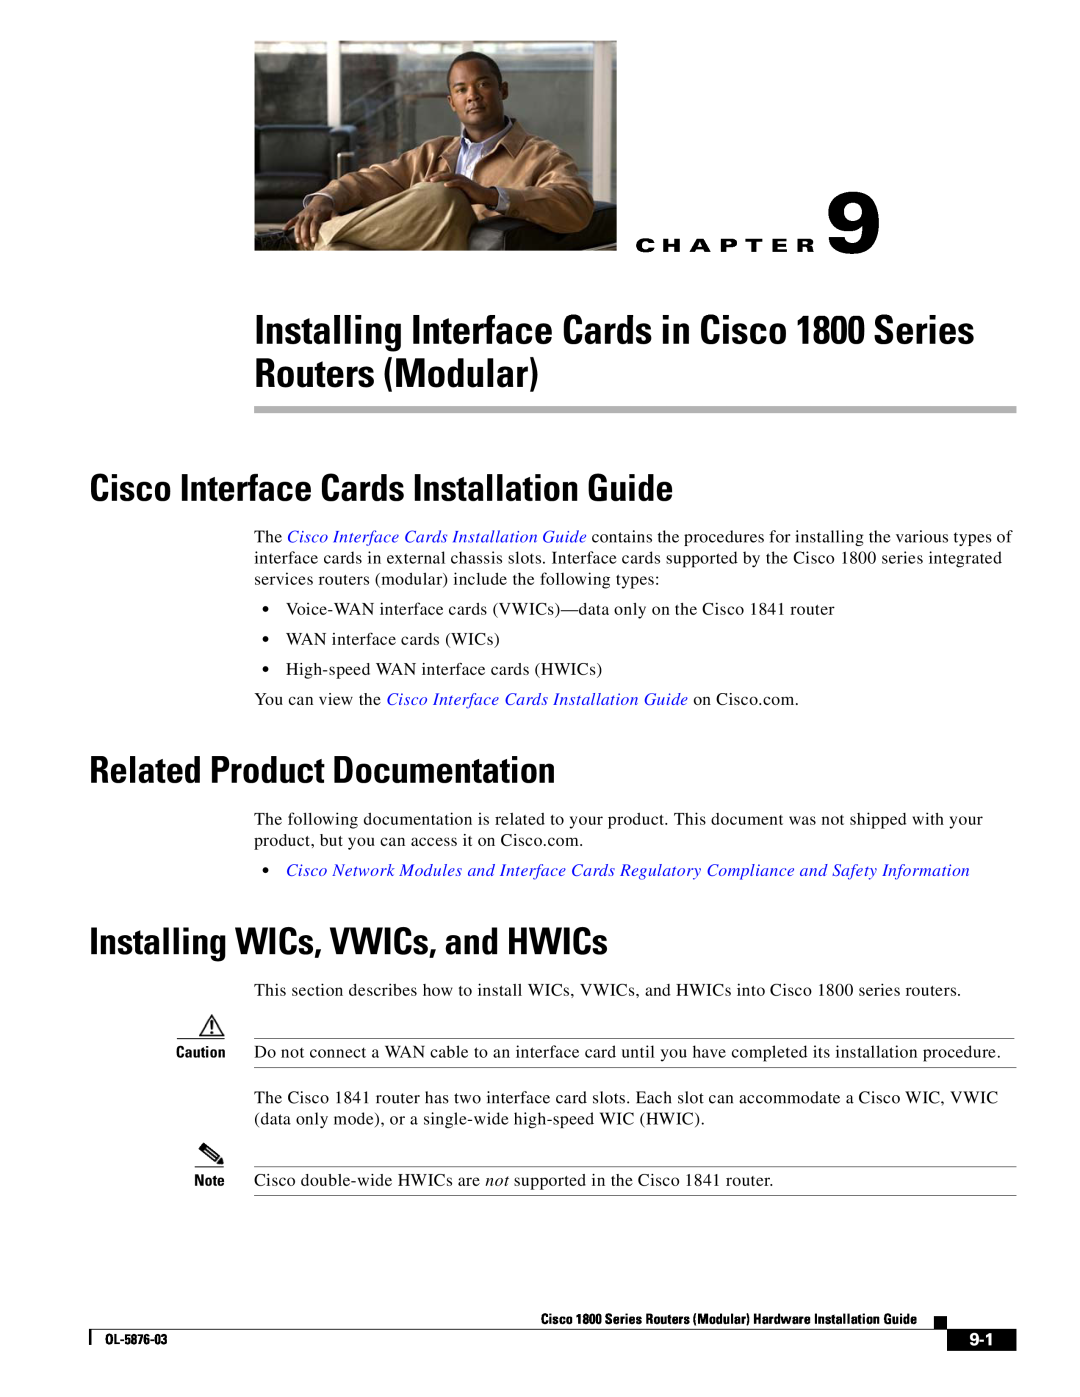 Cisco Systems CISCO1841-HSEC/K9-RF manual Installing Interface Cards in Cisco 1800 Series Routers Modular, C H A P T E R 